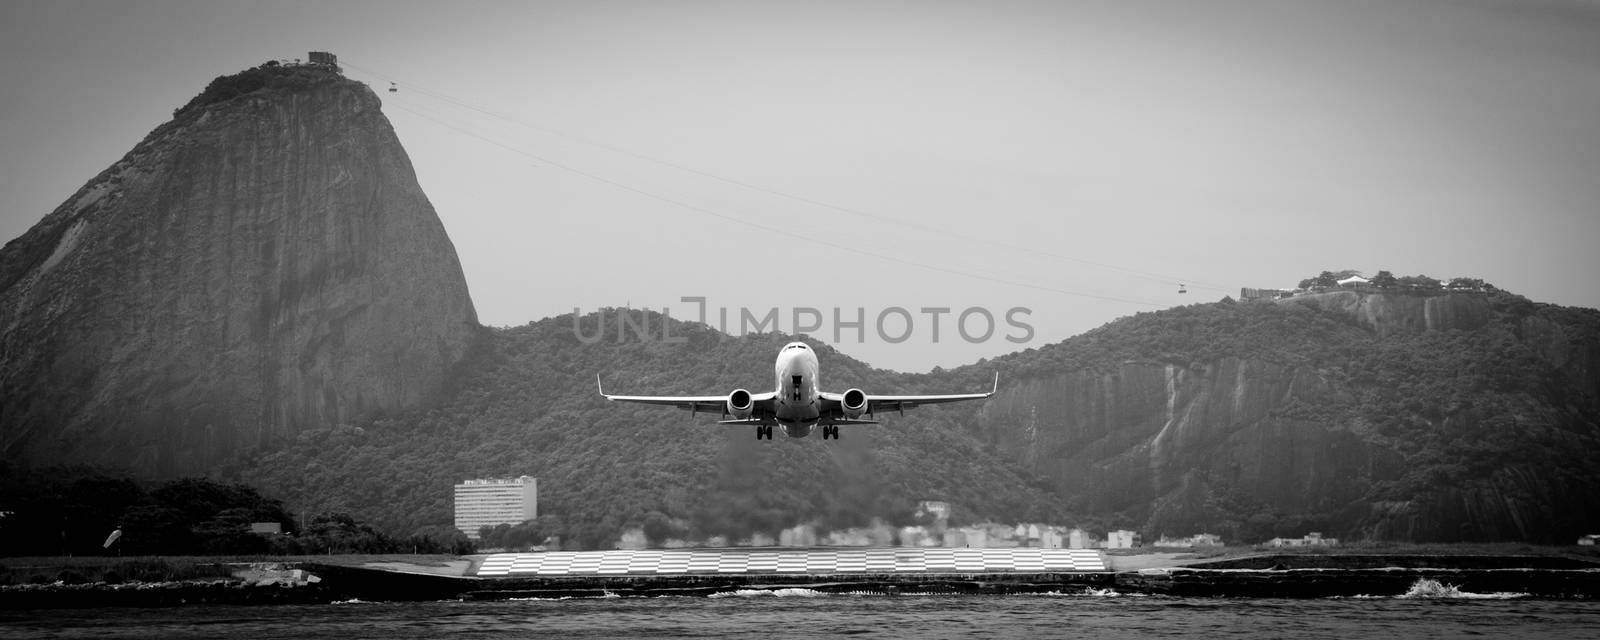 Black and white view of aircraft taking off over Guanbara Bay with Rio de Janiero and Sugar Loaf mountain in background, Brazil.